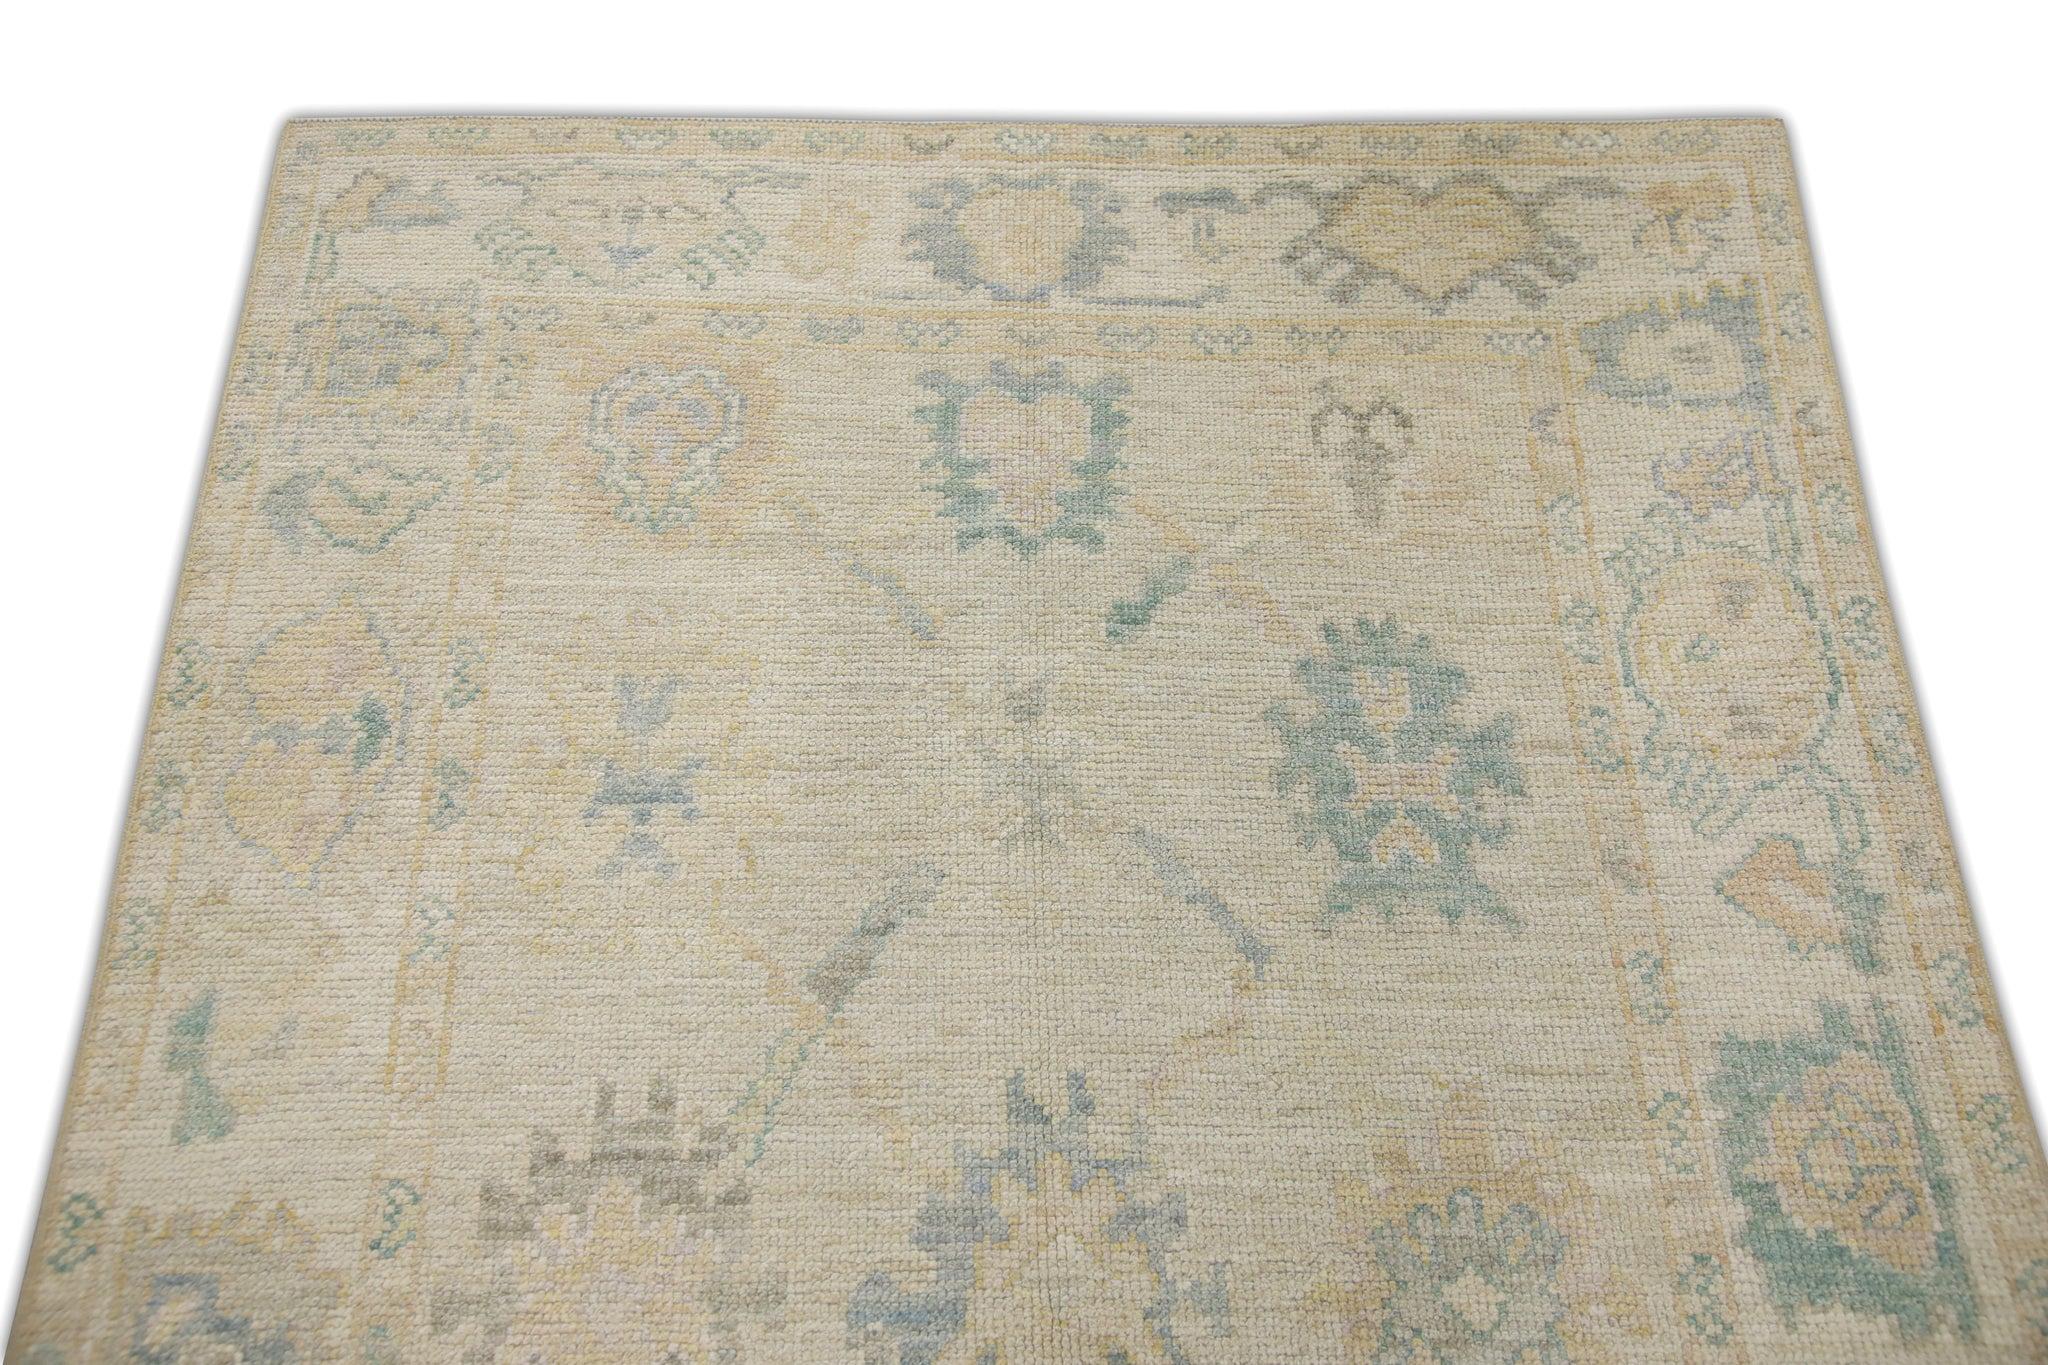 Hand-Woven Multicolor Handwoven Wool Turkish Oushak Rug in Floral Design 4' x 5'9